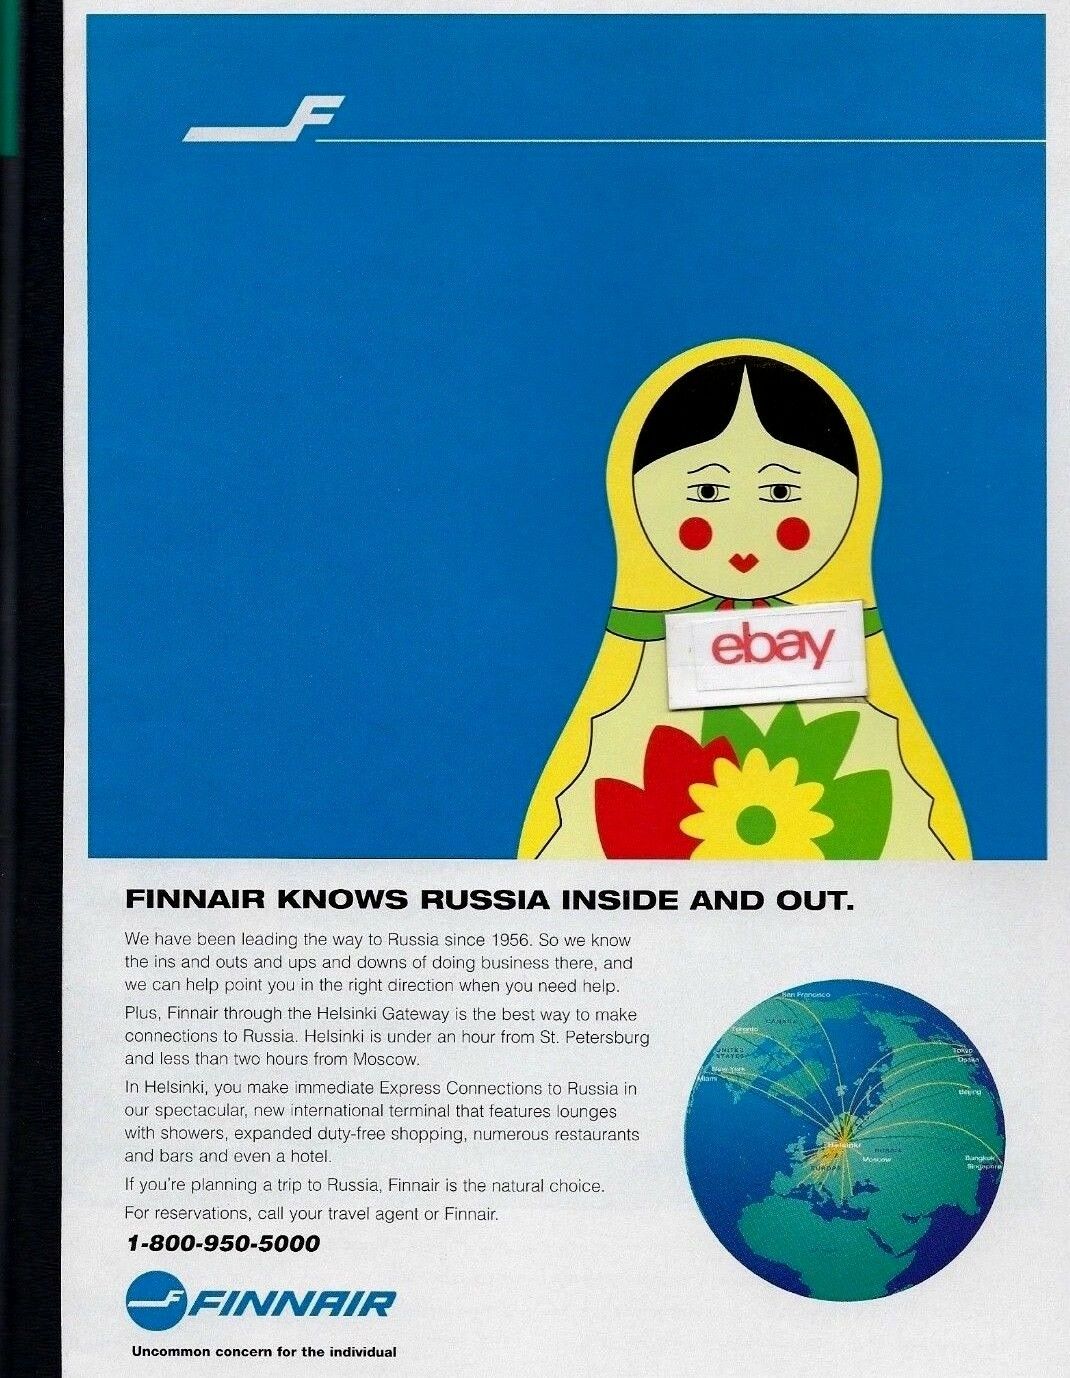 Finnair Finland Knows Russia Inside And Out Since 1956 From Helsinki Gateway Ad